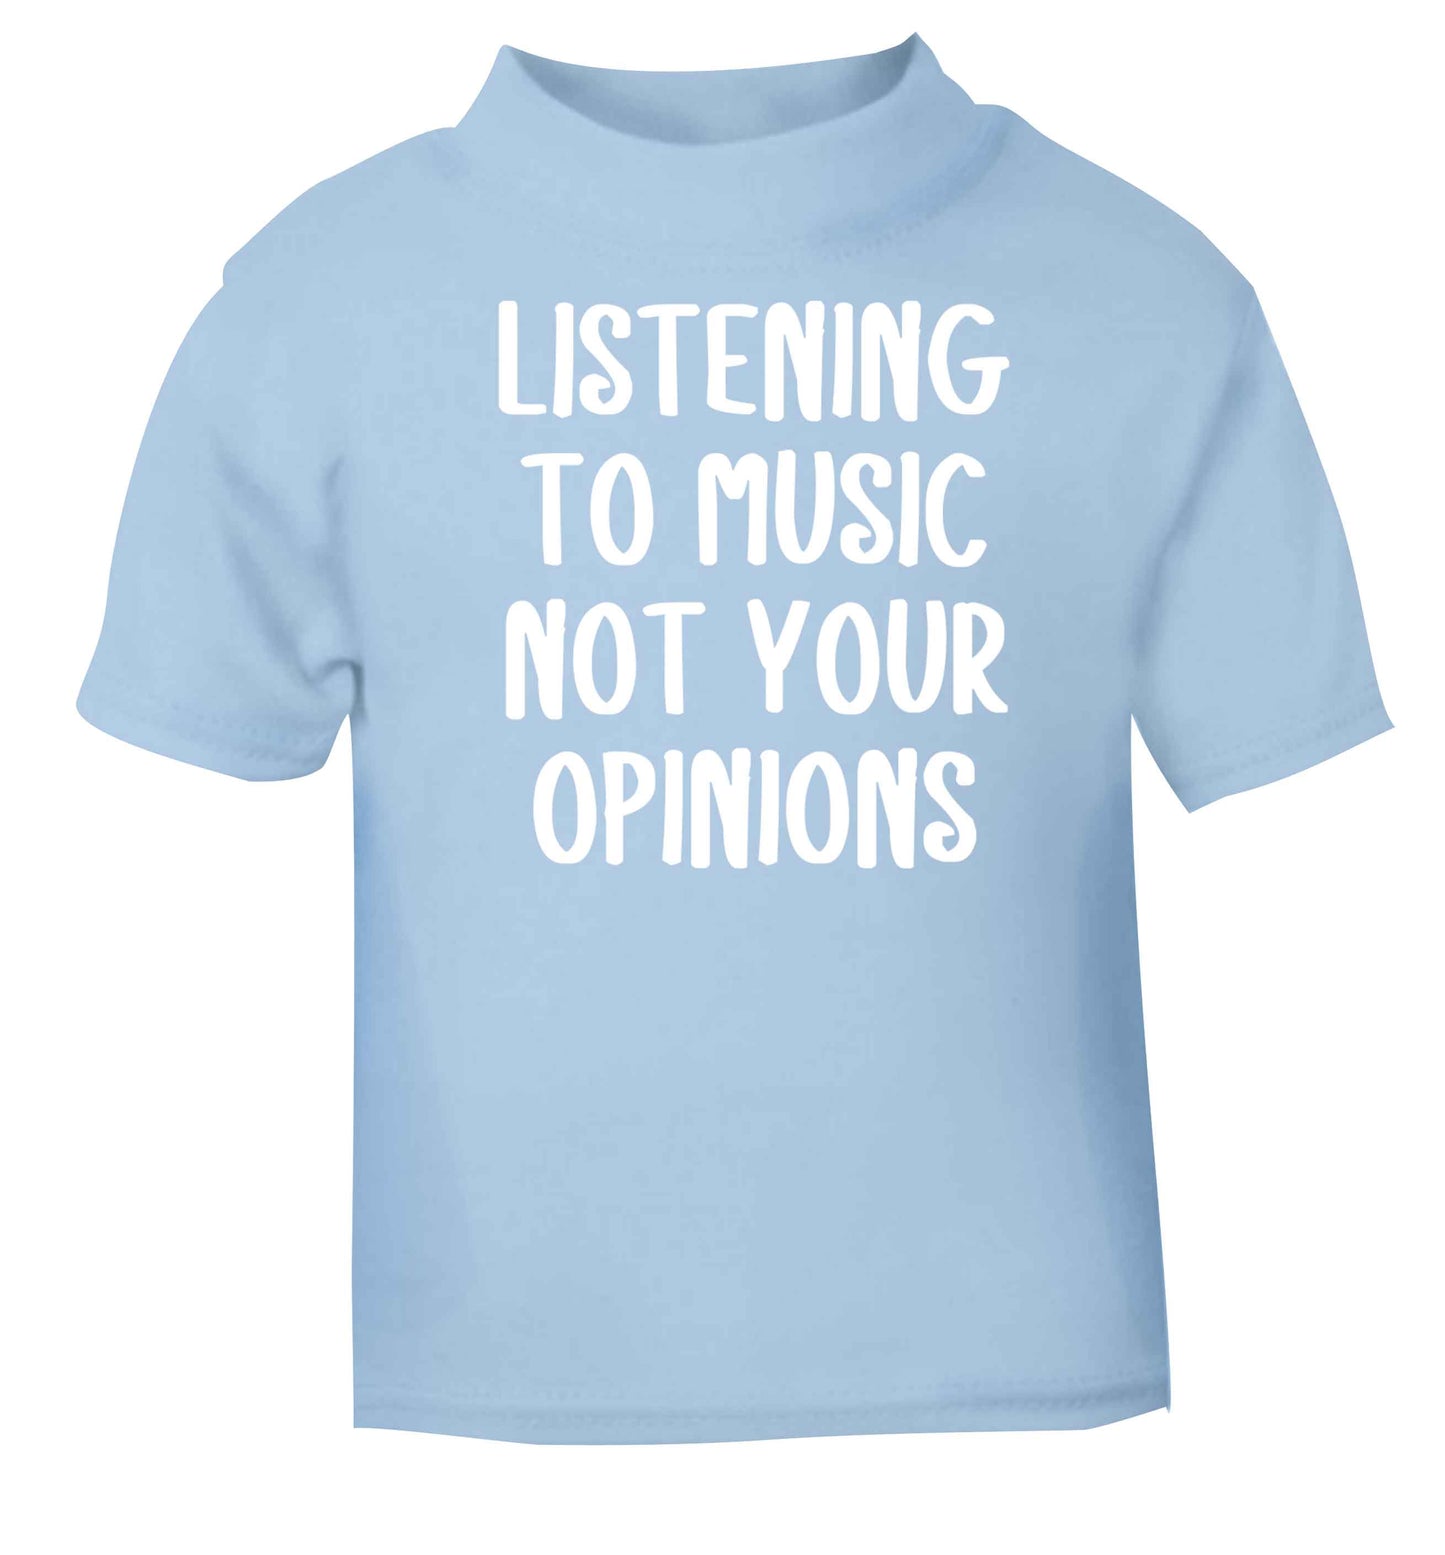 Listening to music not your opinions light blue baby toddler Tshirt 2 Years